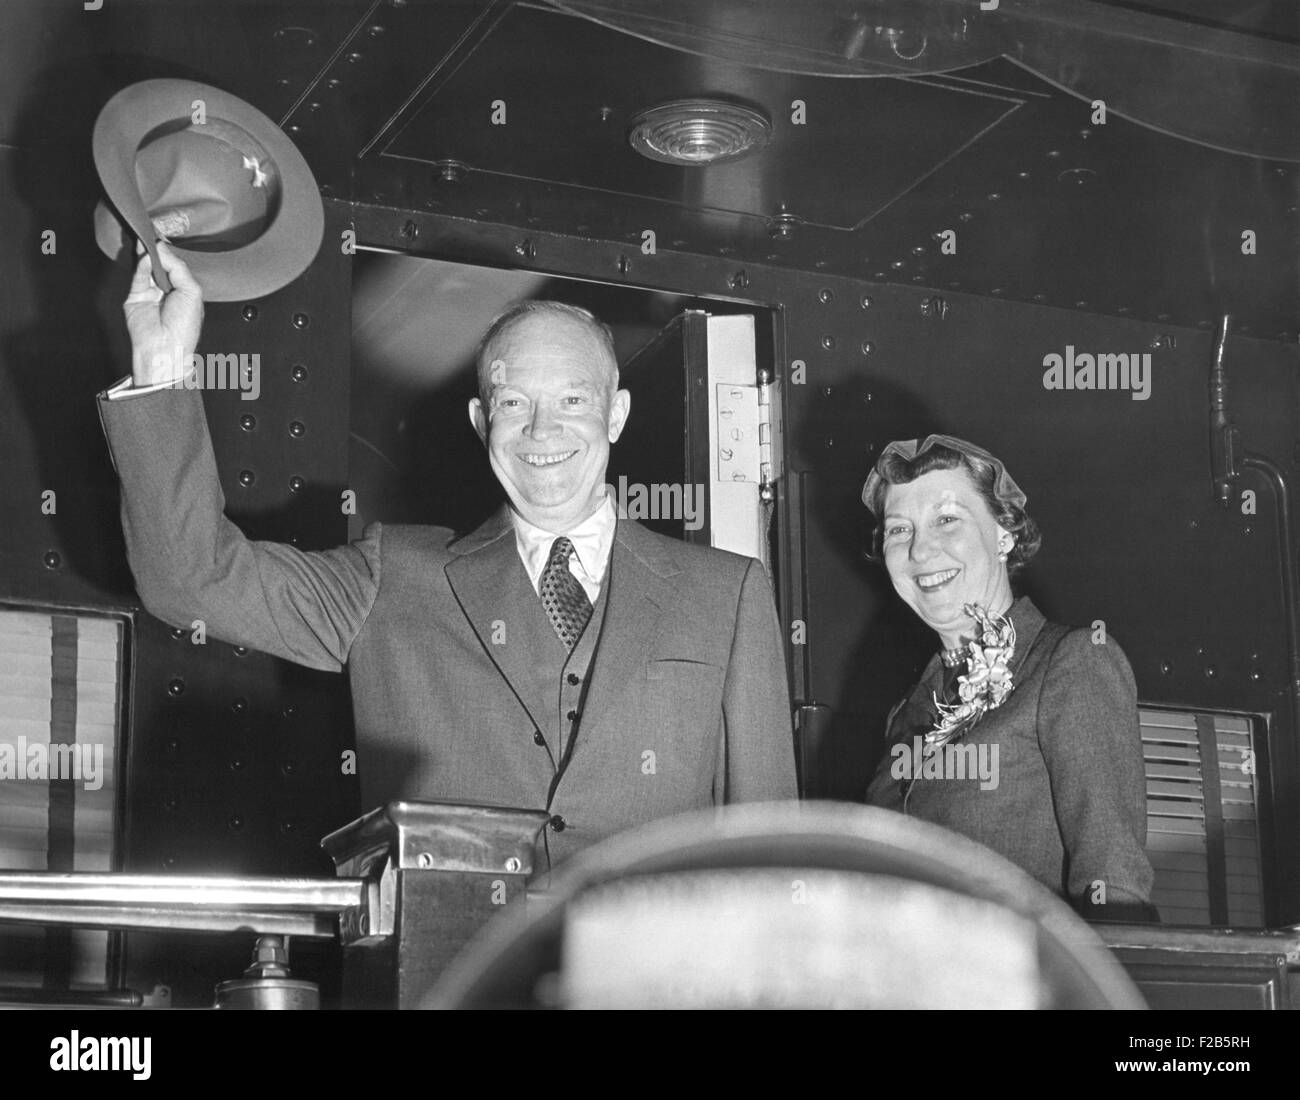 President Eisenhower and wife Mamie wave from the back of a train. Nov. 14, 1953. They were departing for a three day trip to Canada. - (BSLOC 2014 16 77) Stock Photo